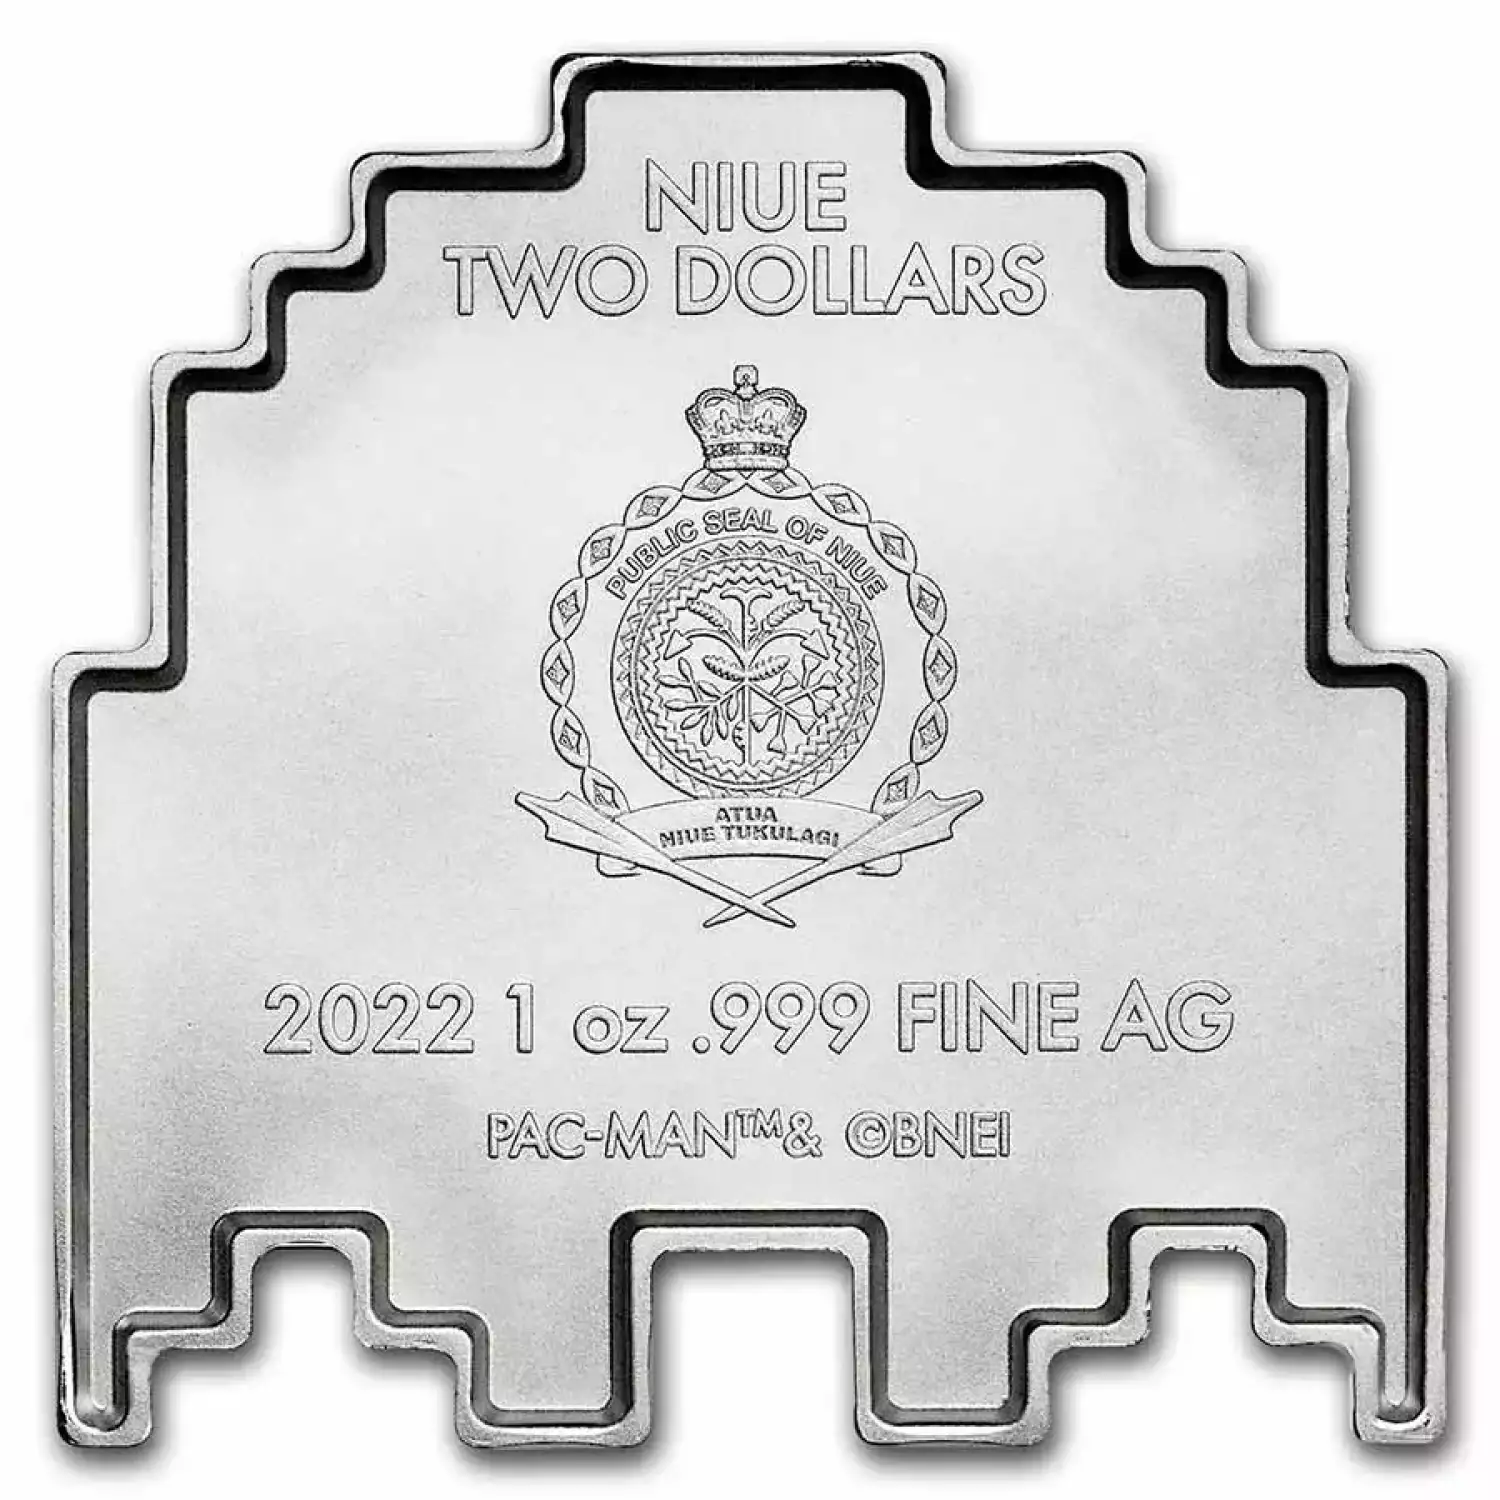 2022 Niue 1 oz Silver $2 PAC-MAN™ GHOST Shaped Stackable Coin (2)